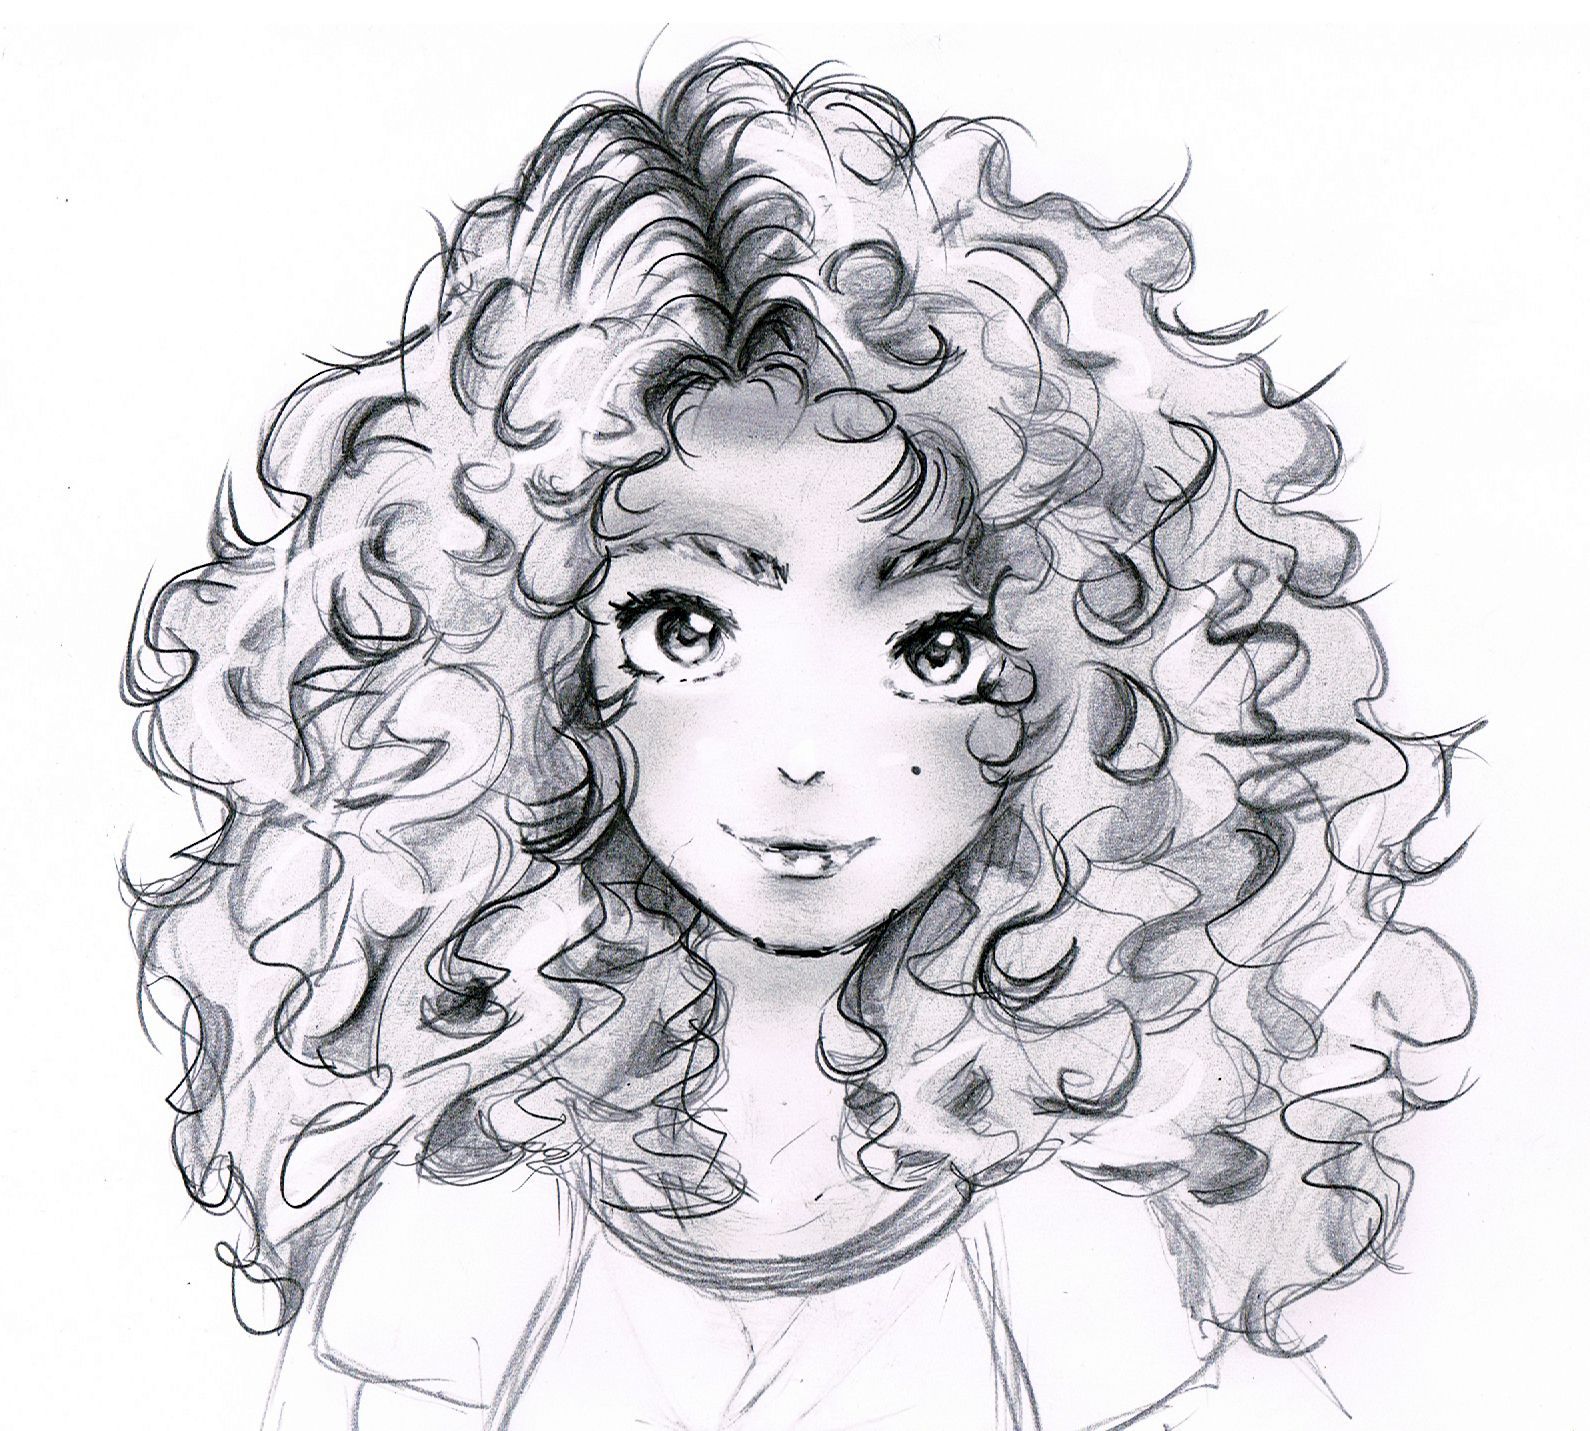 Lexica - Male whos mixed black and white curly hair anime style